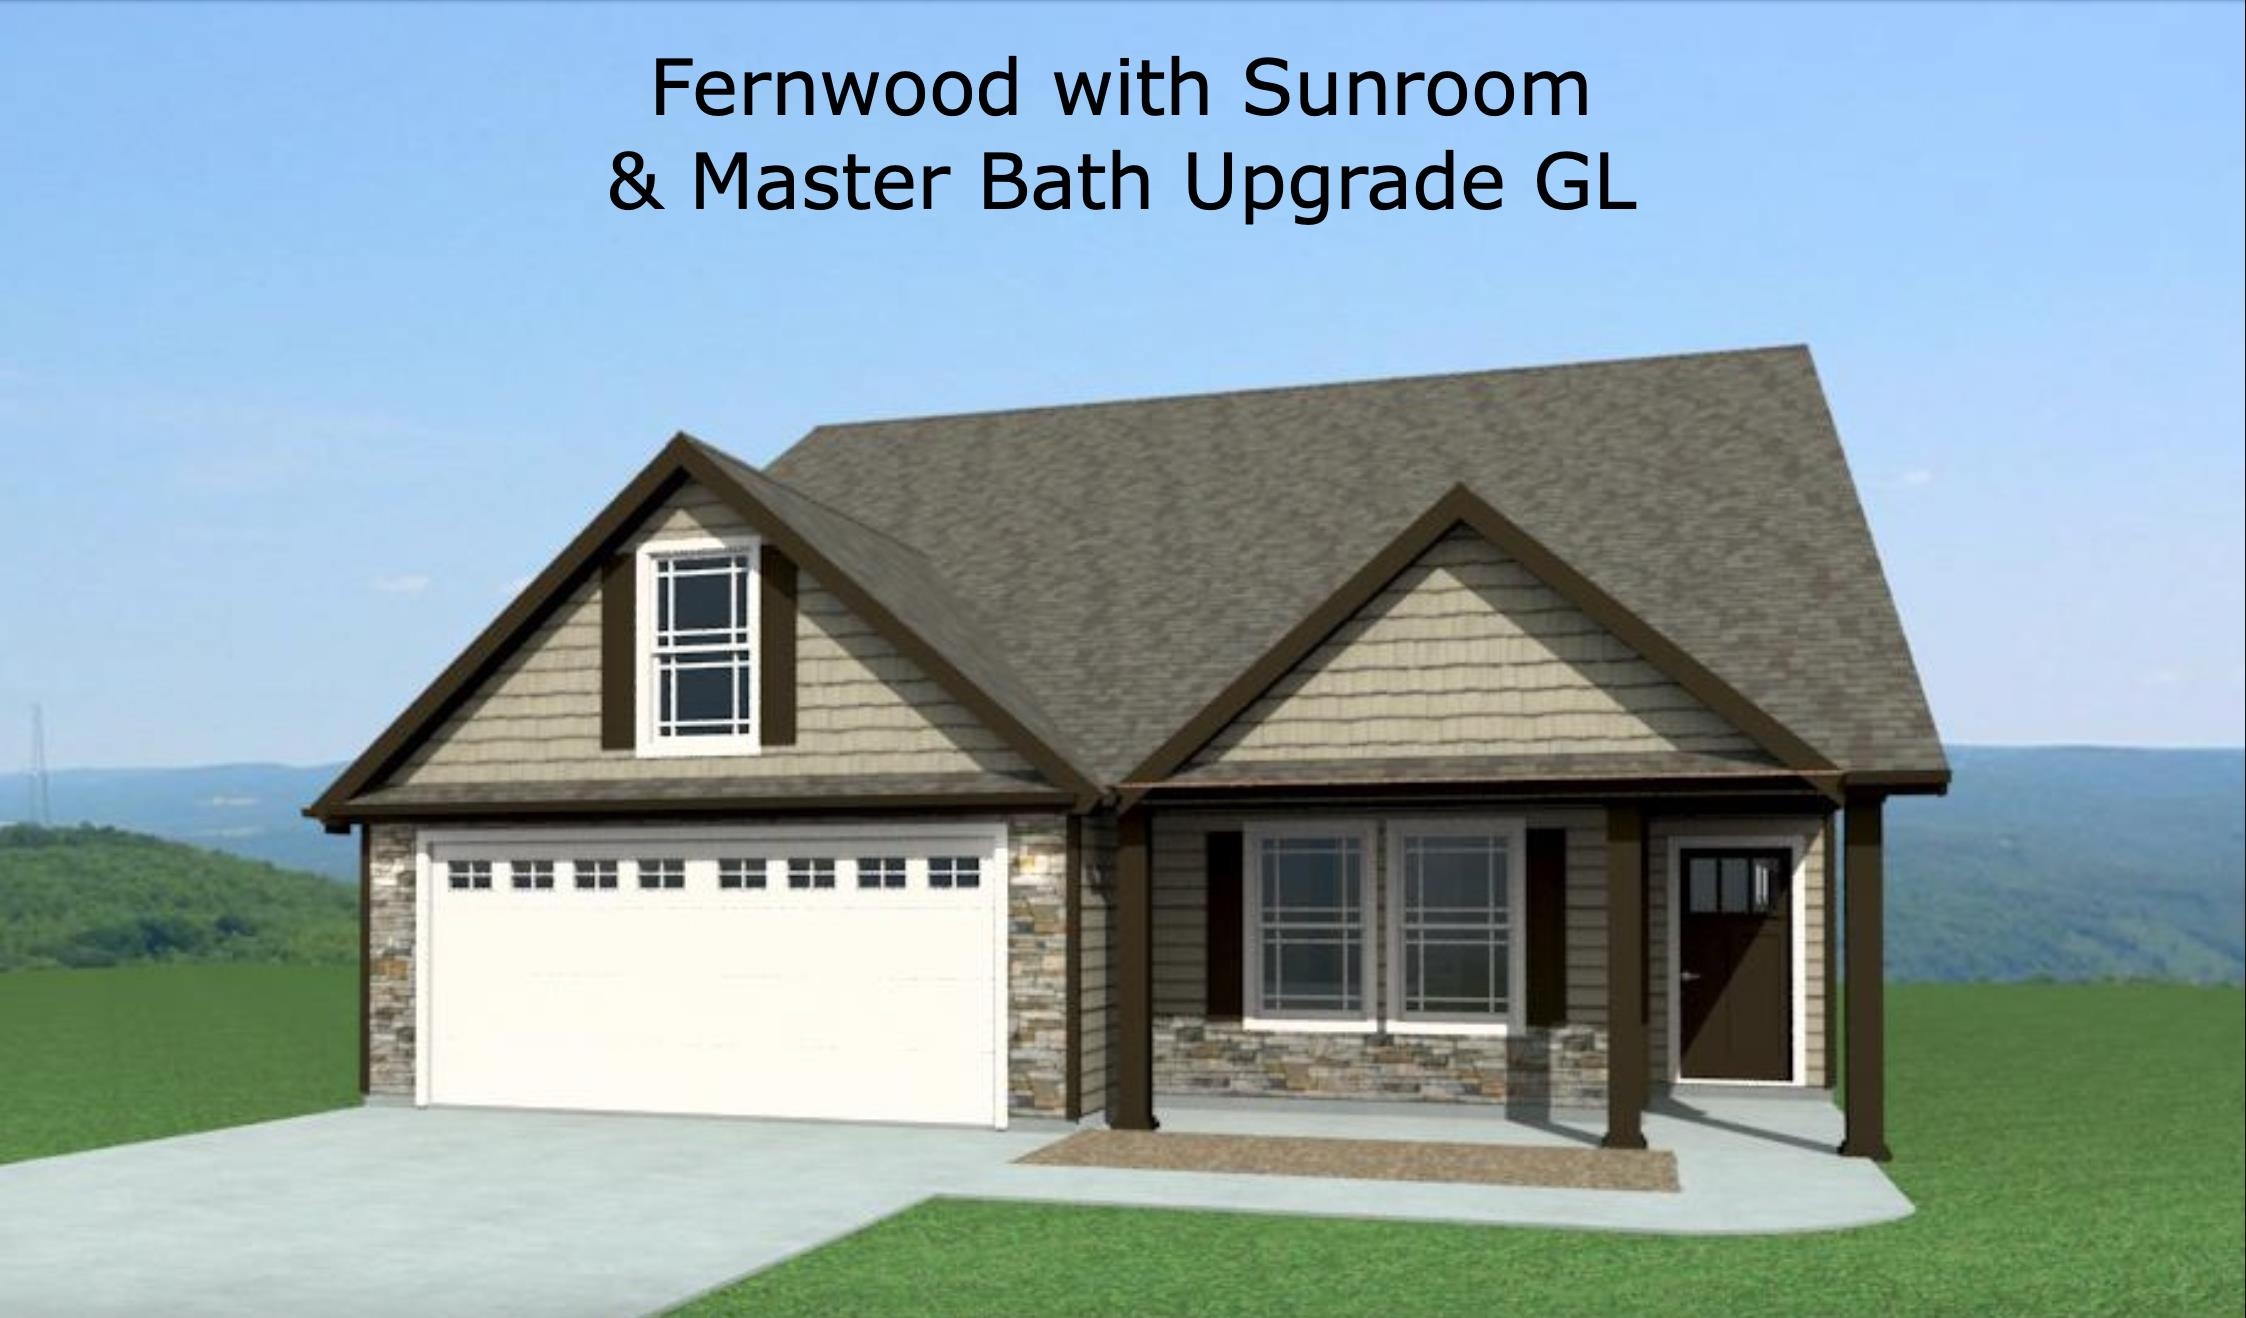 The Fernwood plan offers a beautiful, modern layout.  Kitchen/Dining open to living area. Home complete with the trademark chair rail, crown molding, and rope lighting. 12 x12 sunroom.  Dogwood Meadows is a brand new 30 lot subdivision in Campobello with Convenient access to Landrum, Tryon, Greenville, and Spartanburg.  Preferred Lender/Attorney Closing Costs Incentive Offered!  LOT 19